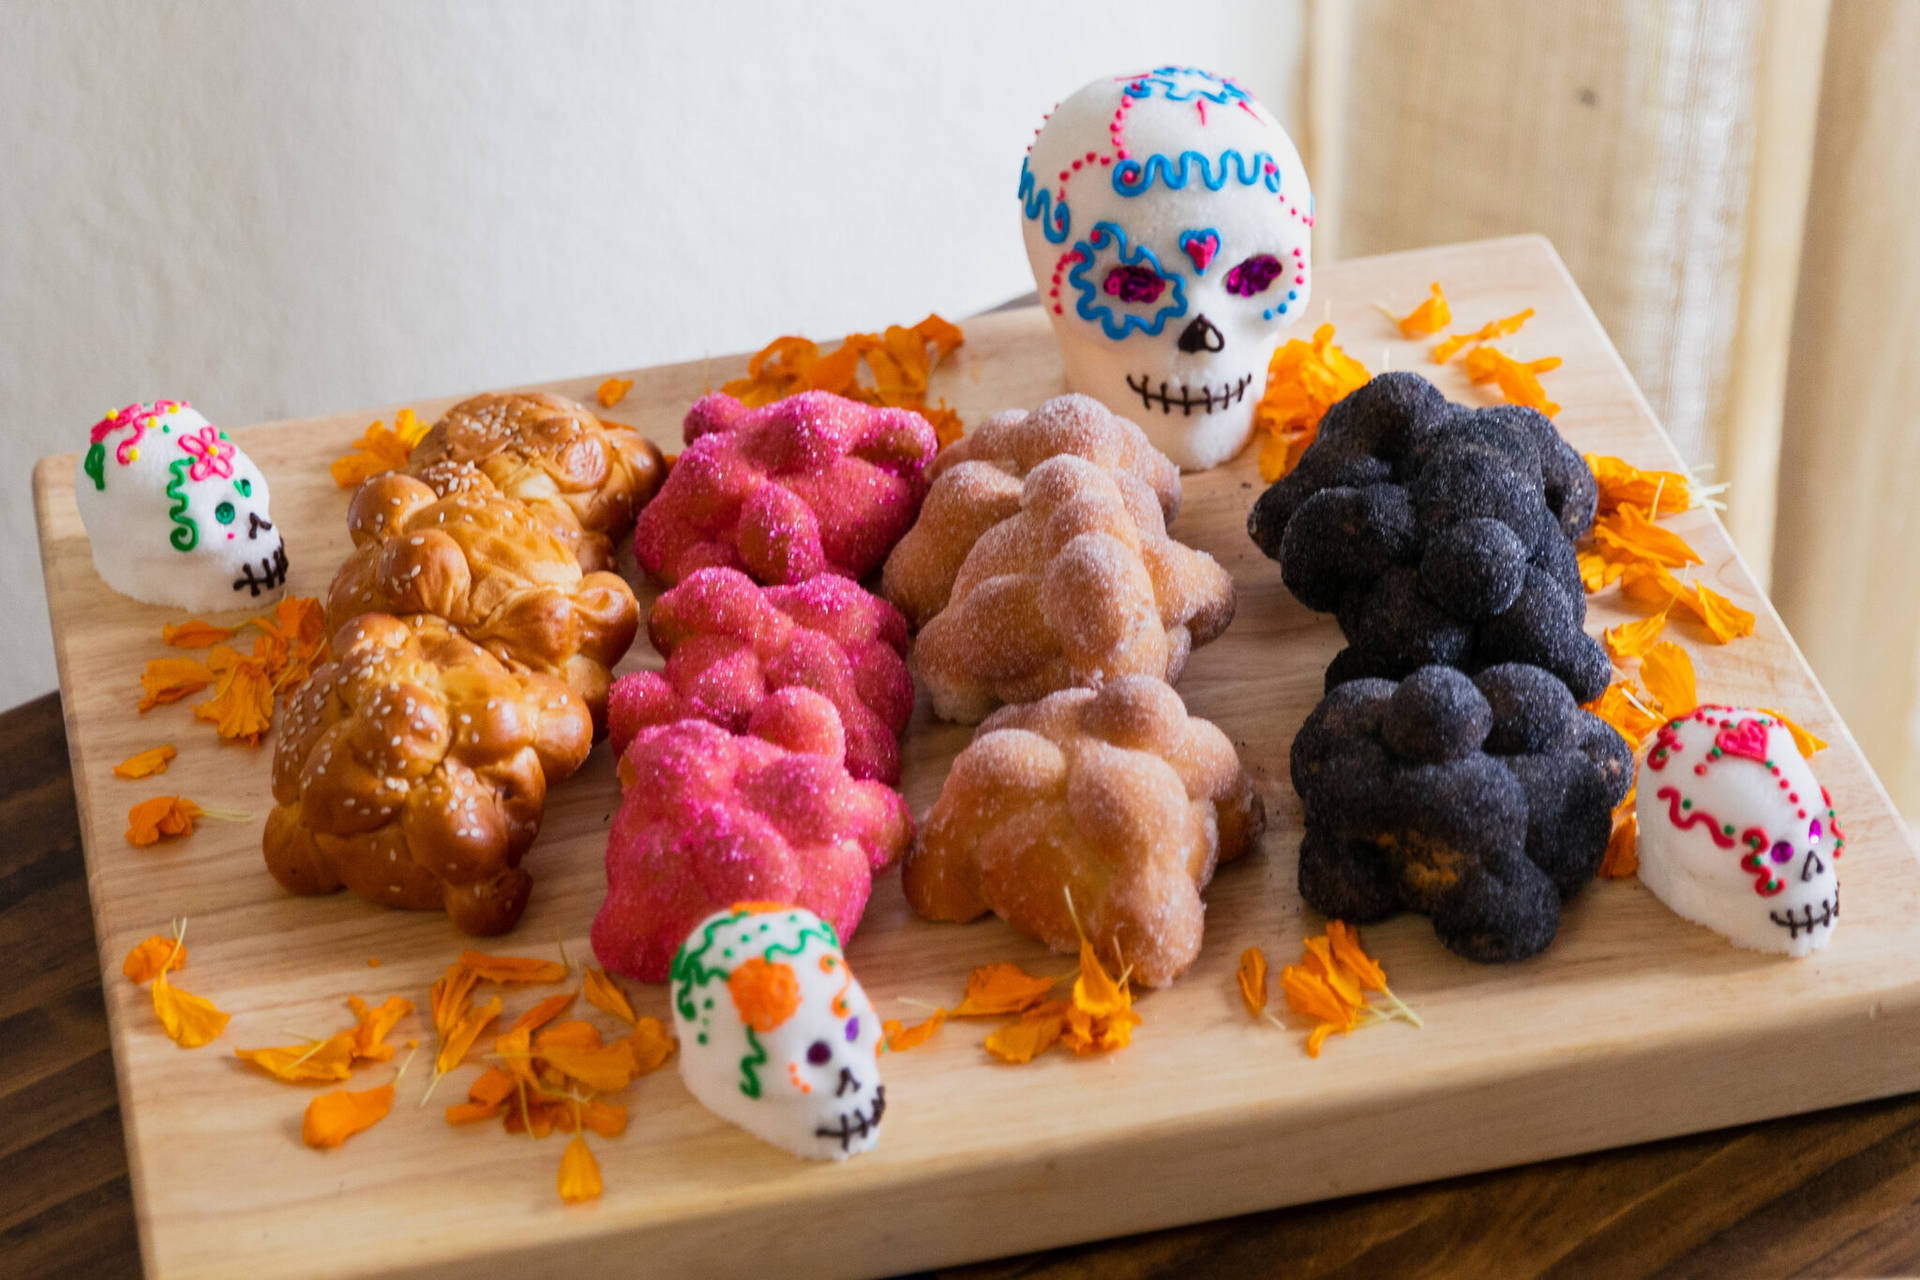 Mexican Figurines And Pastries